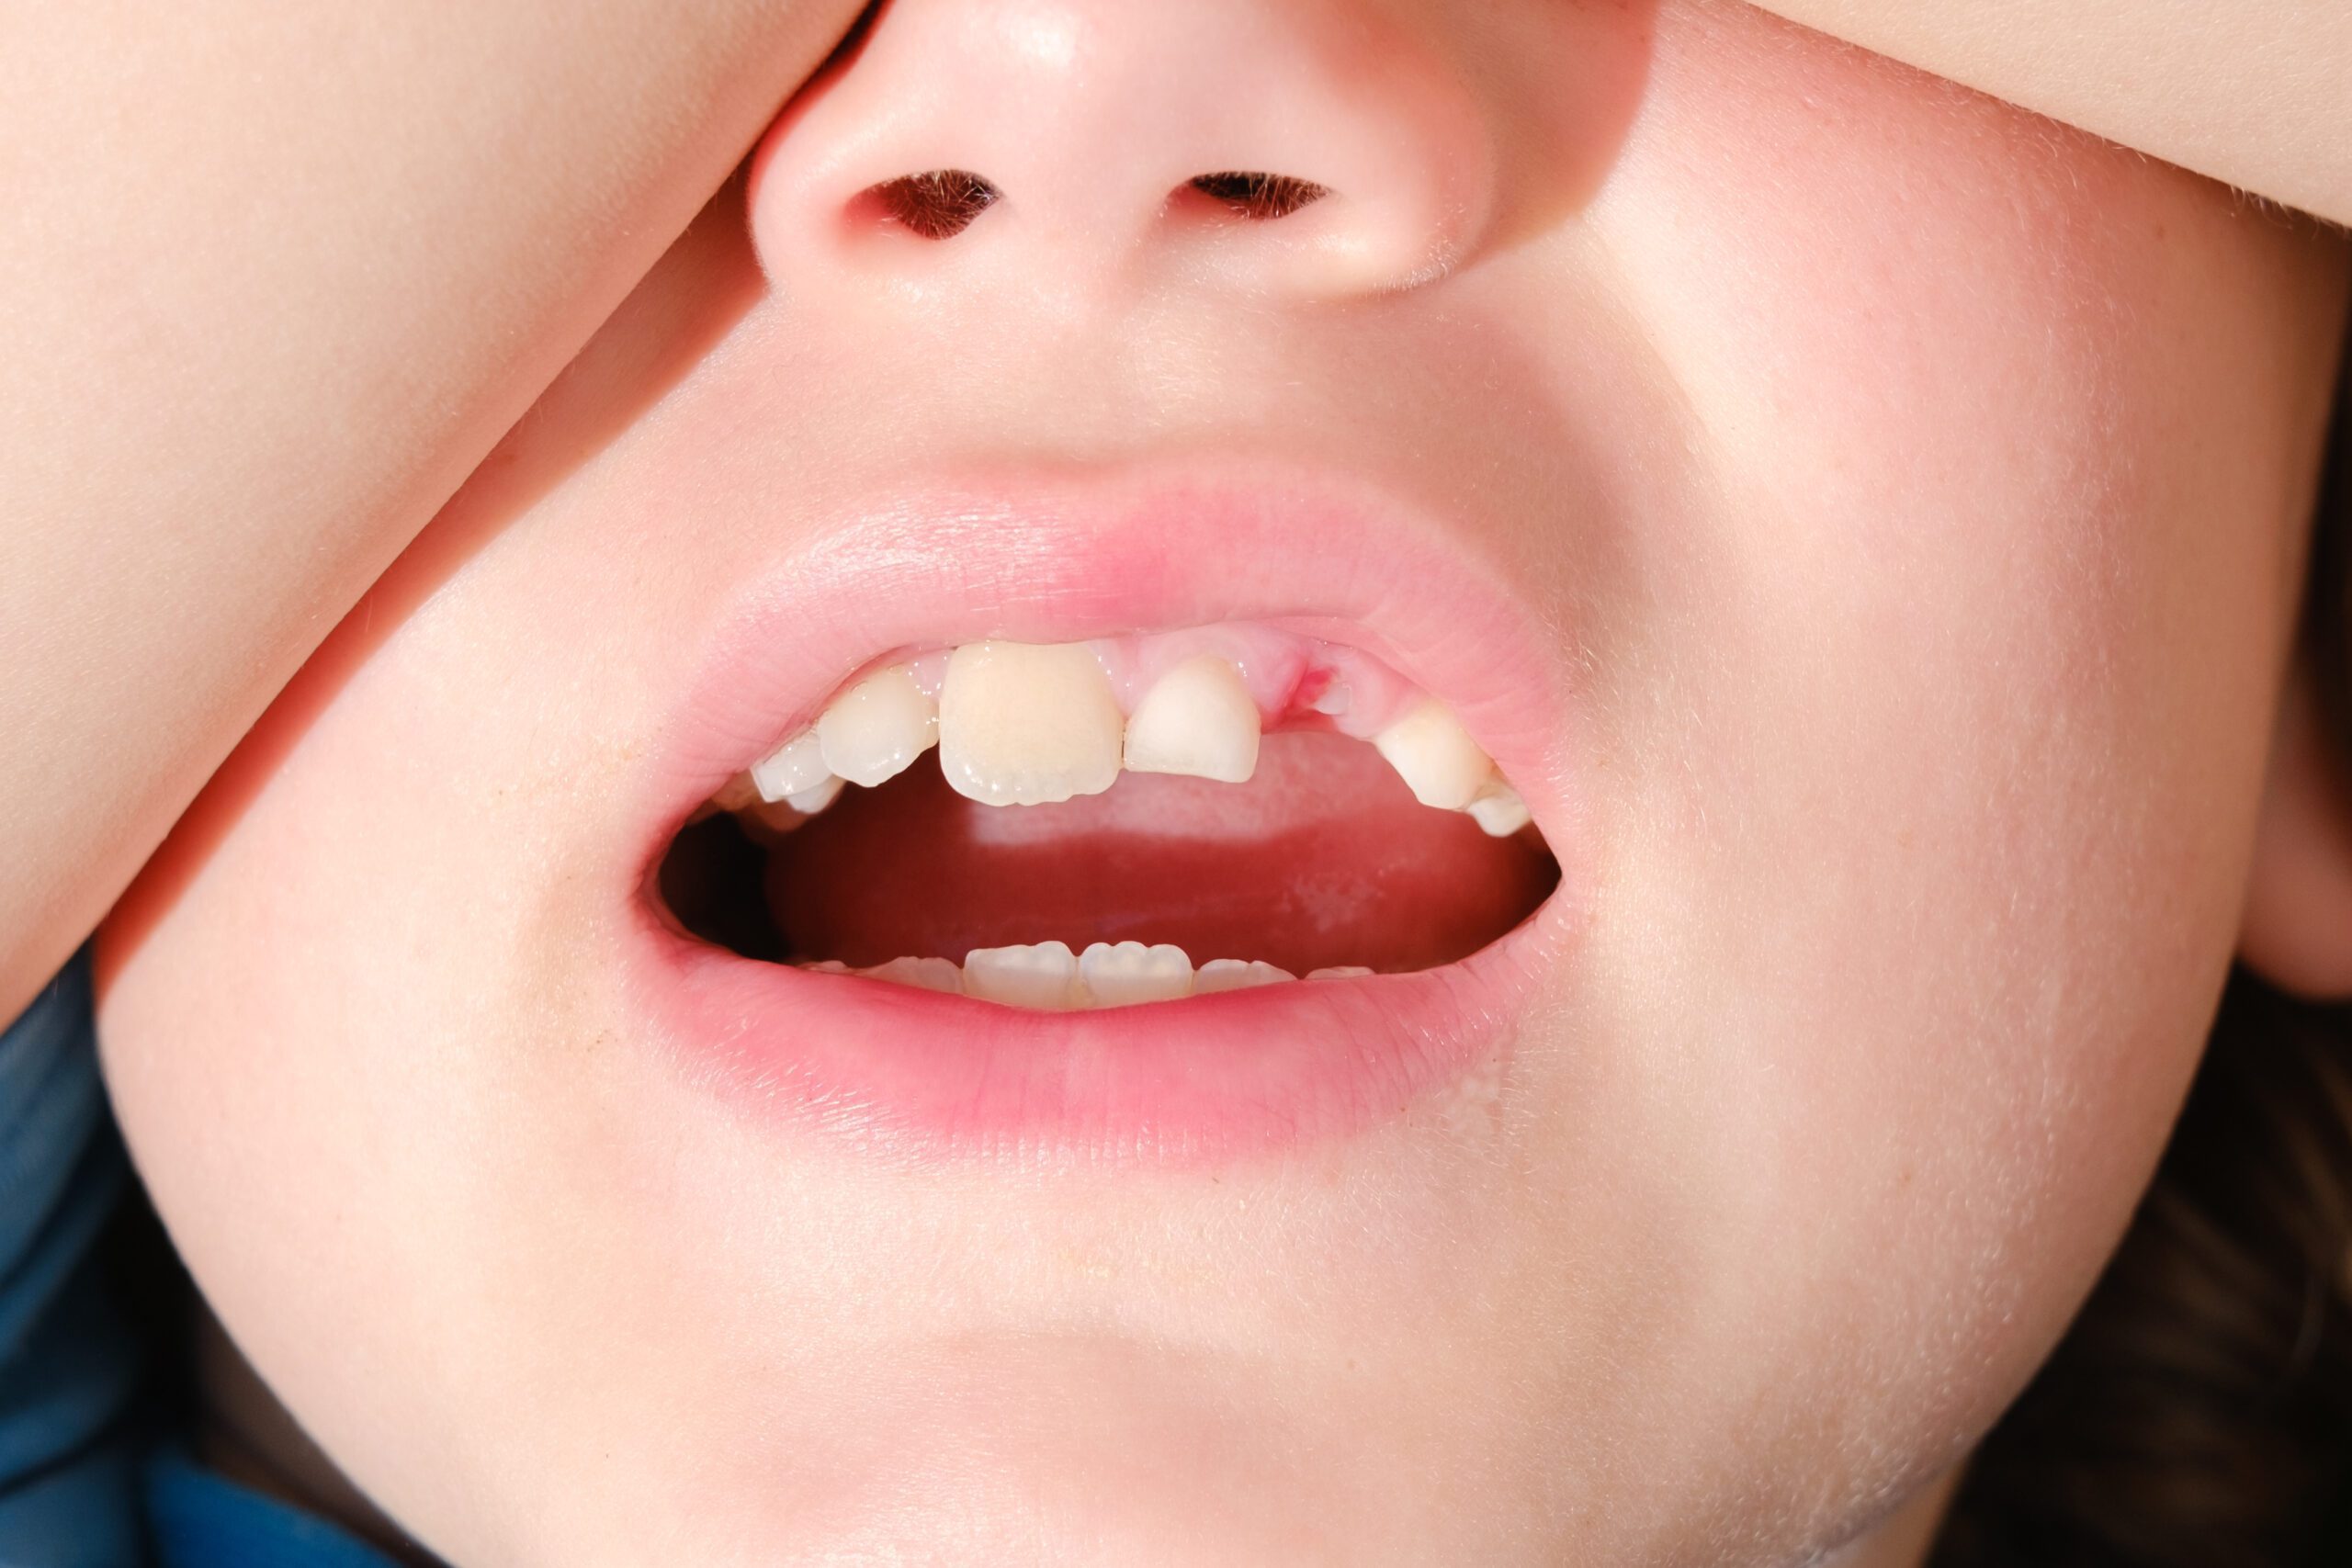 Bleeding after tooth extraction in a child